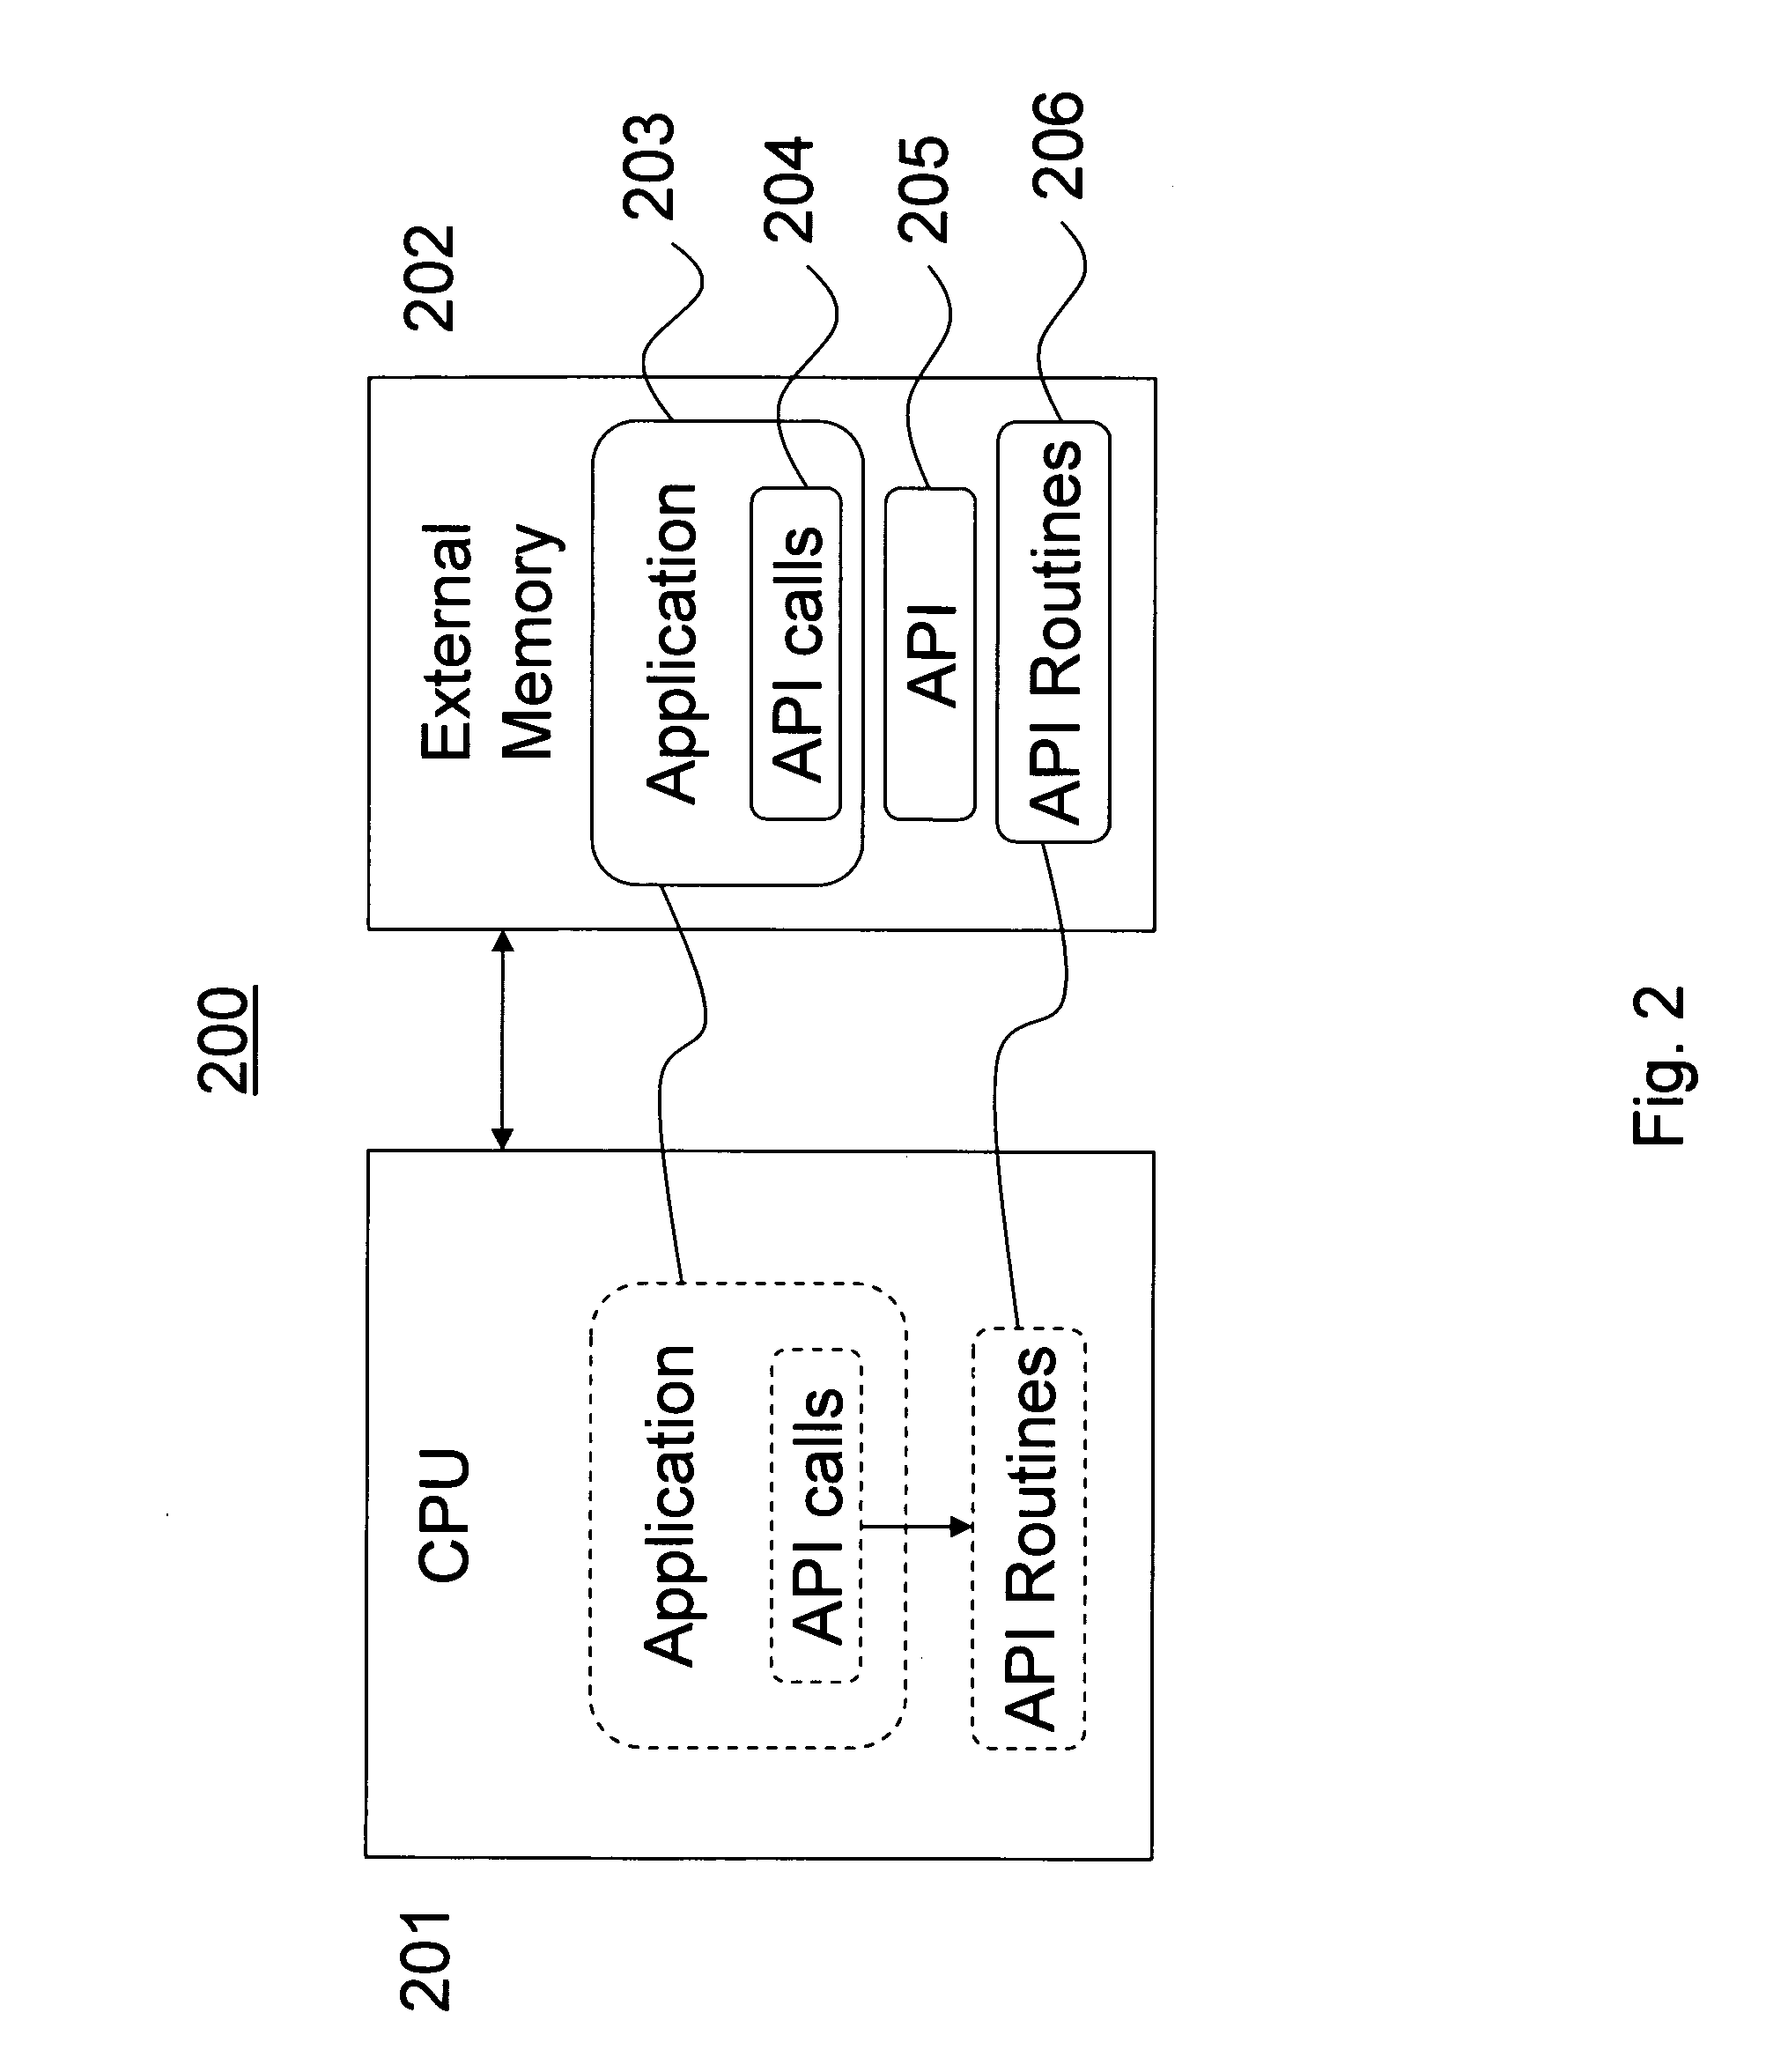 Application programming interface for fluid simulations